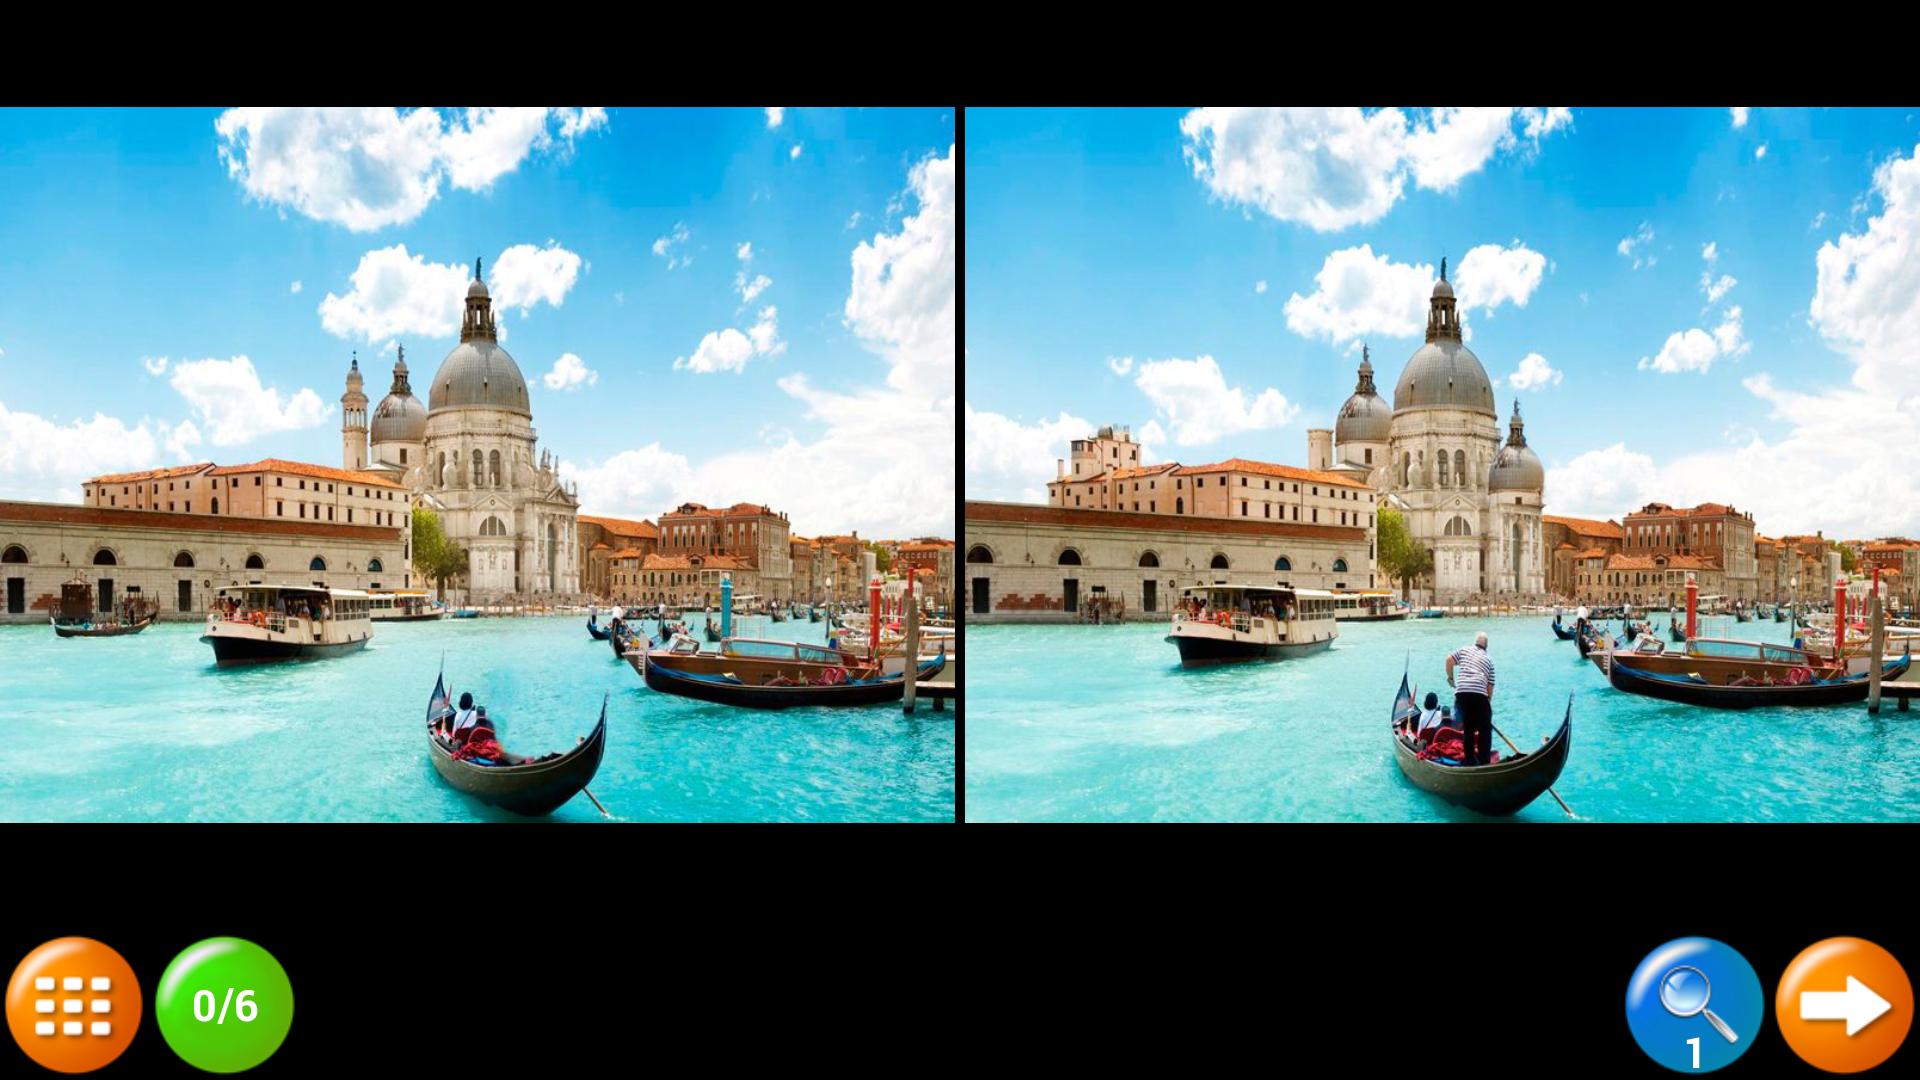 Find 6 Differences 1.0.4 Screenshot 8